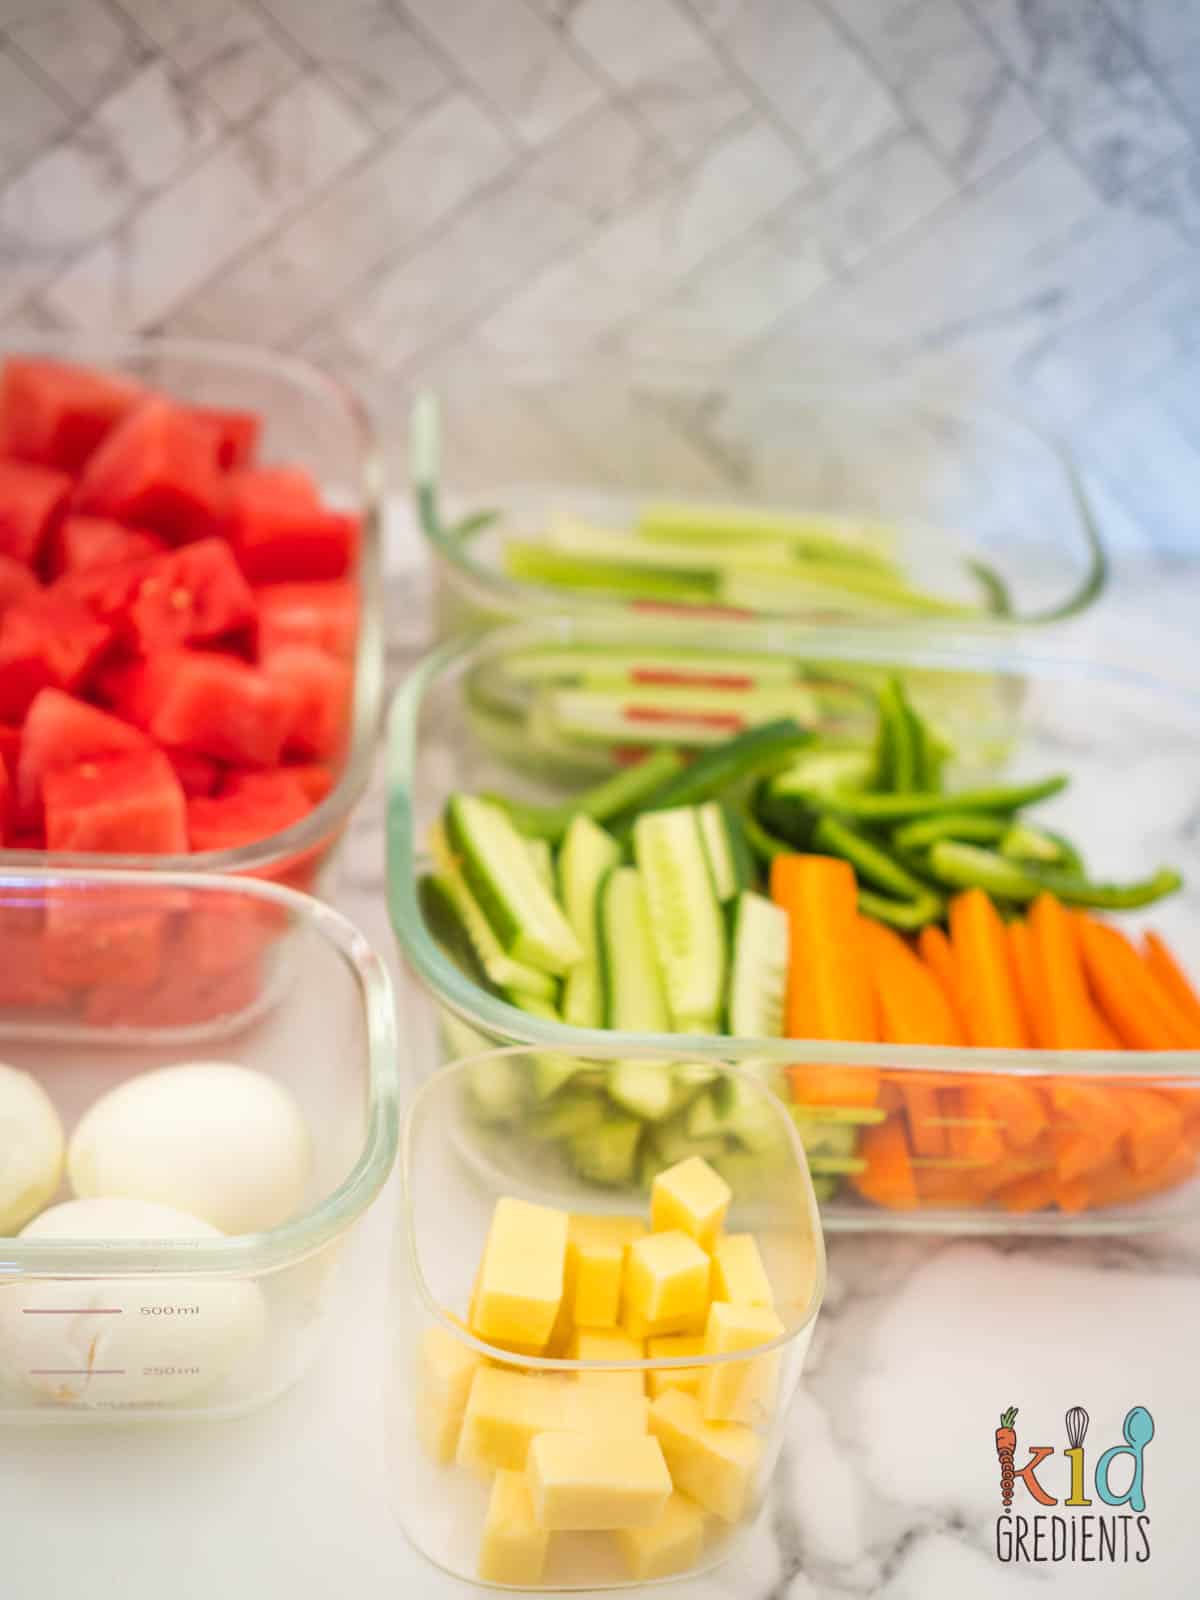 meal prepped carrots, cucumbers, watermelon, eggs and cheese